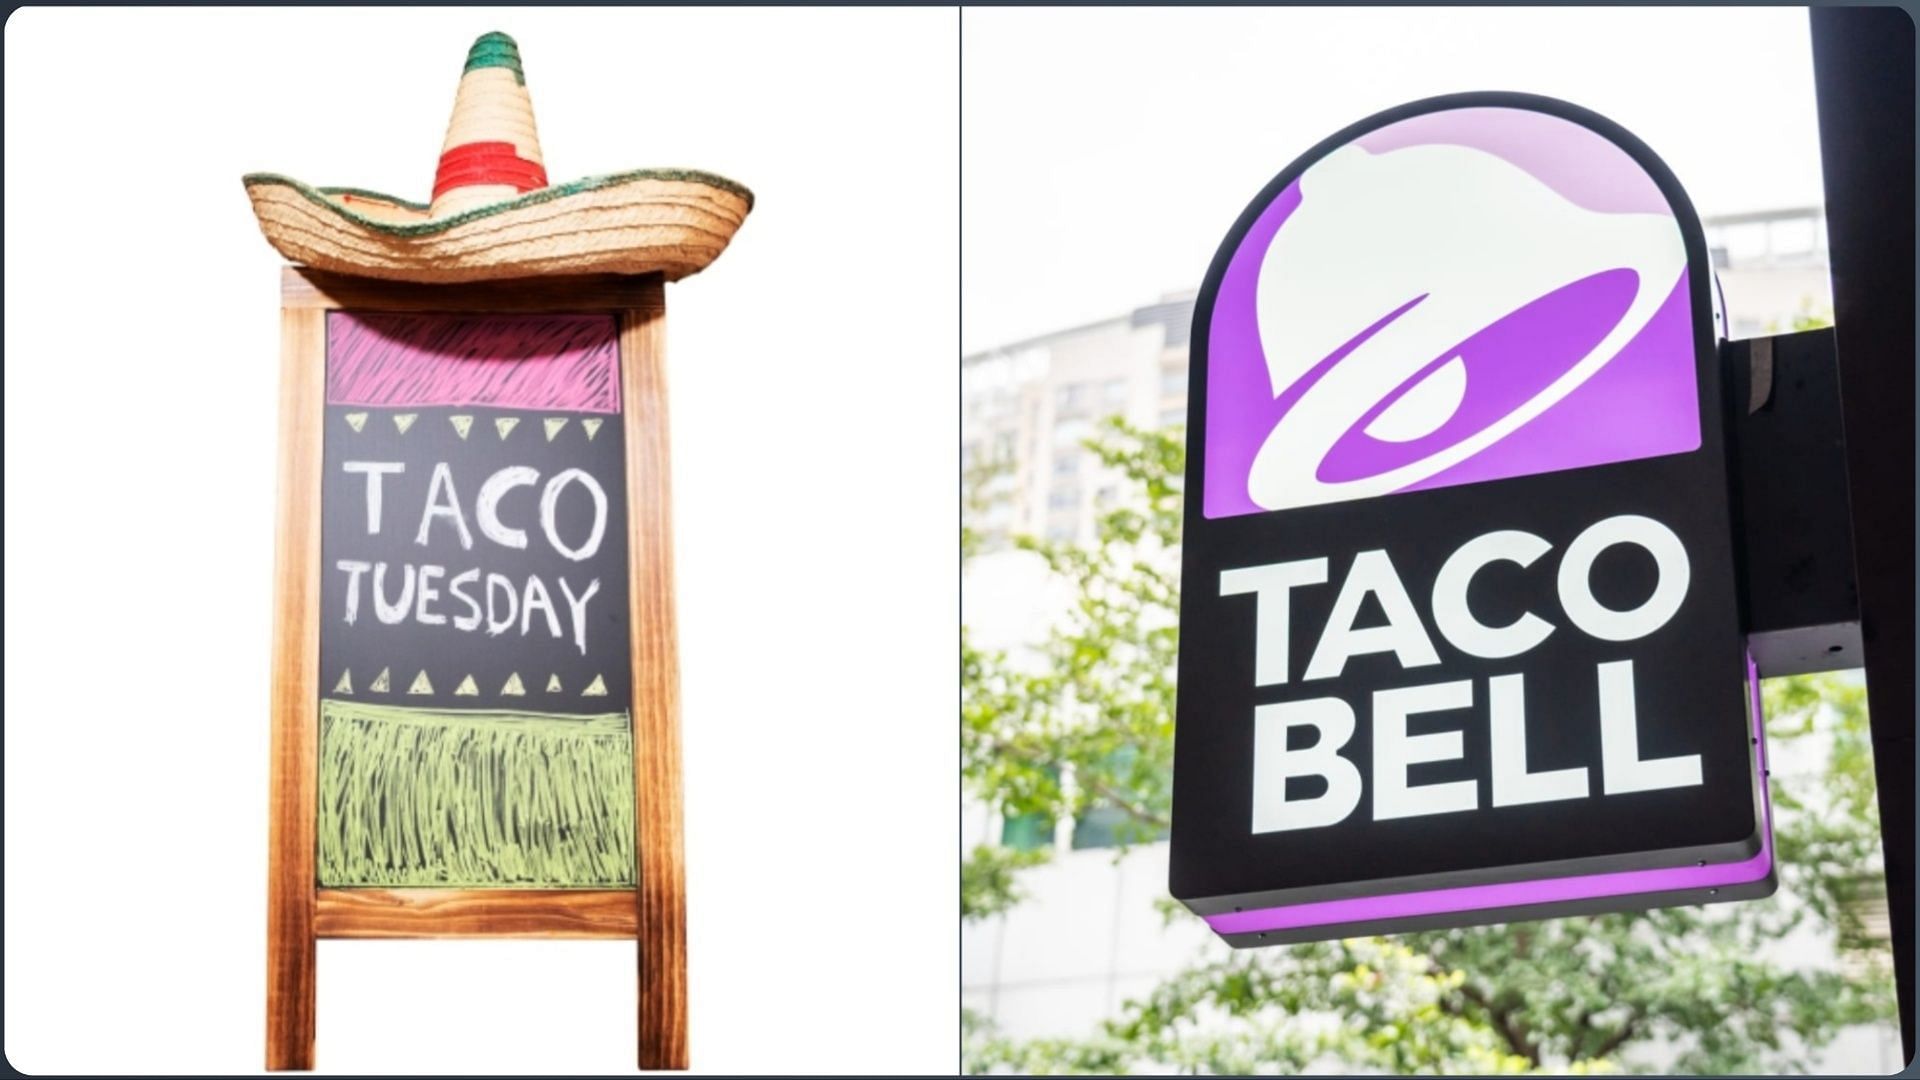 Taco Bell successfully liberates the phrase &quot;Taco Tuesday&quot; after Taco John